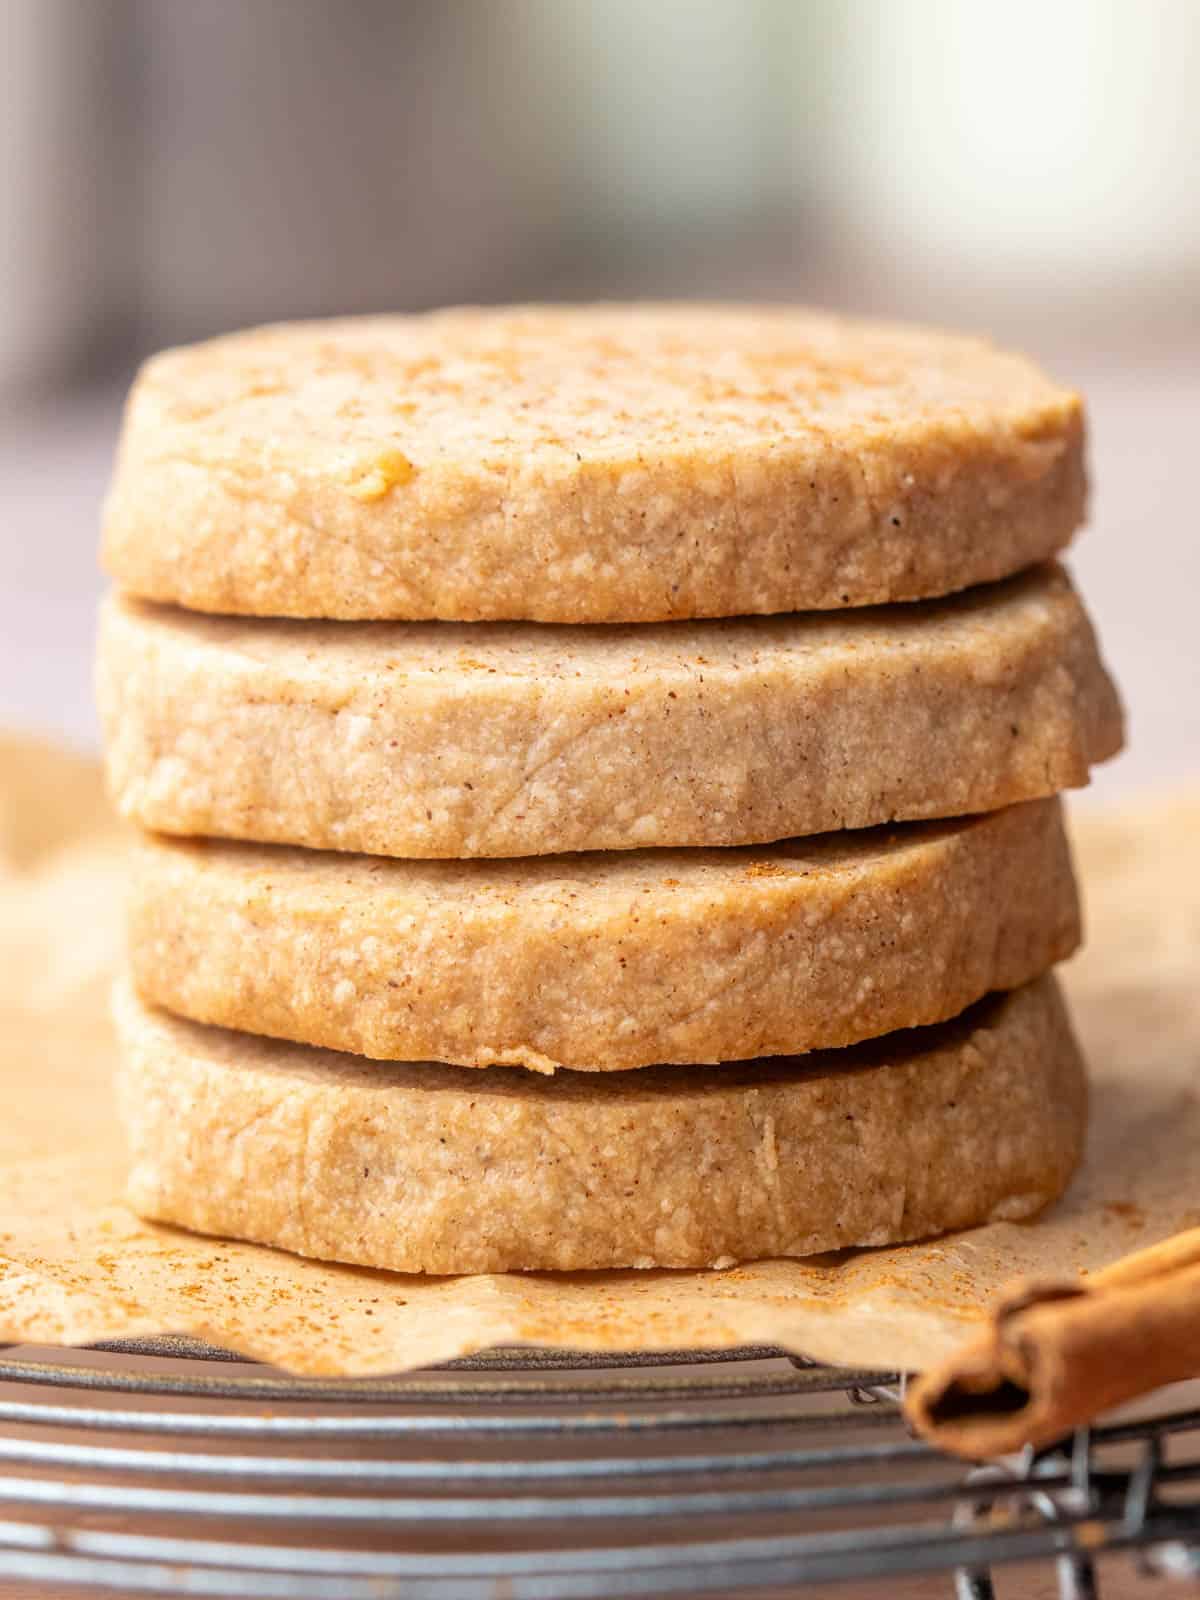 A stack of shortbread cookies with cinnamon sprinkled on top on a wire rack.